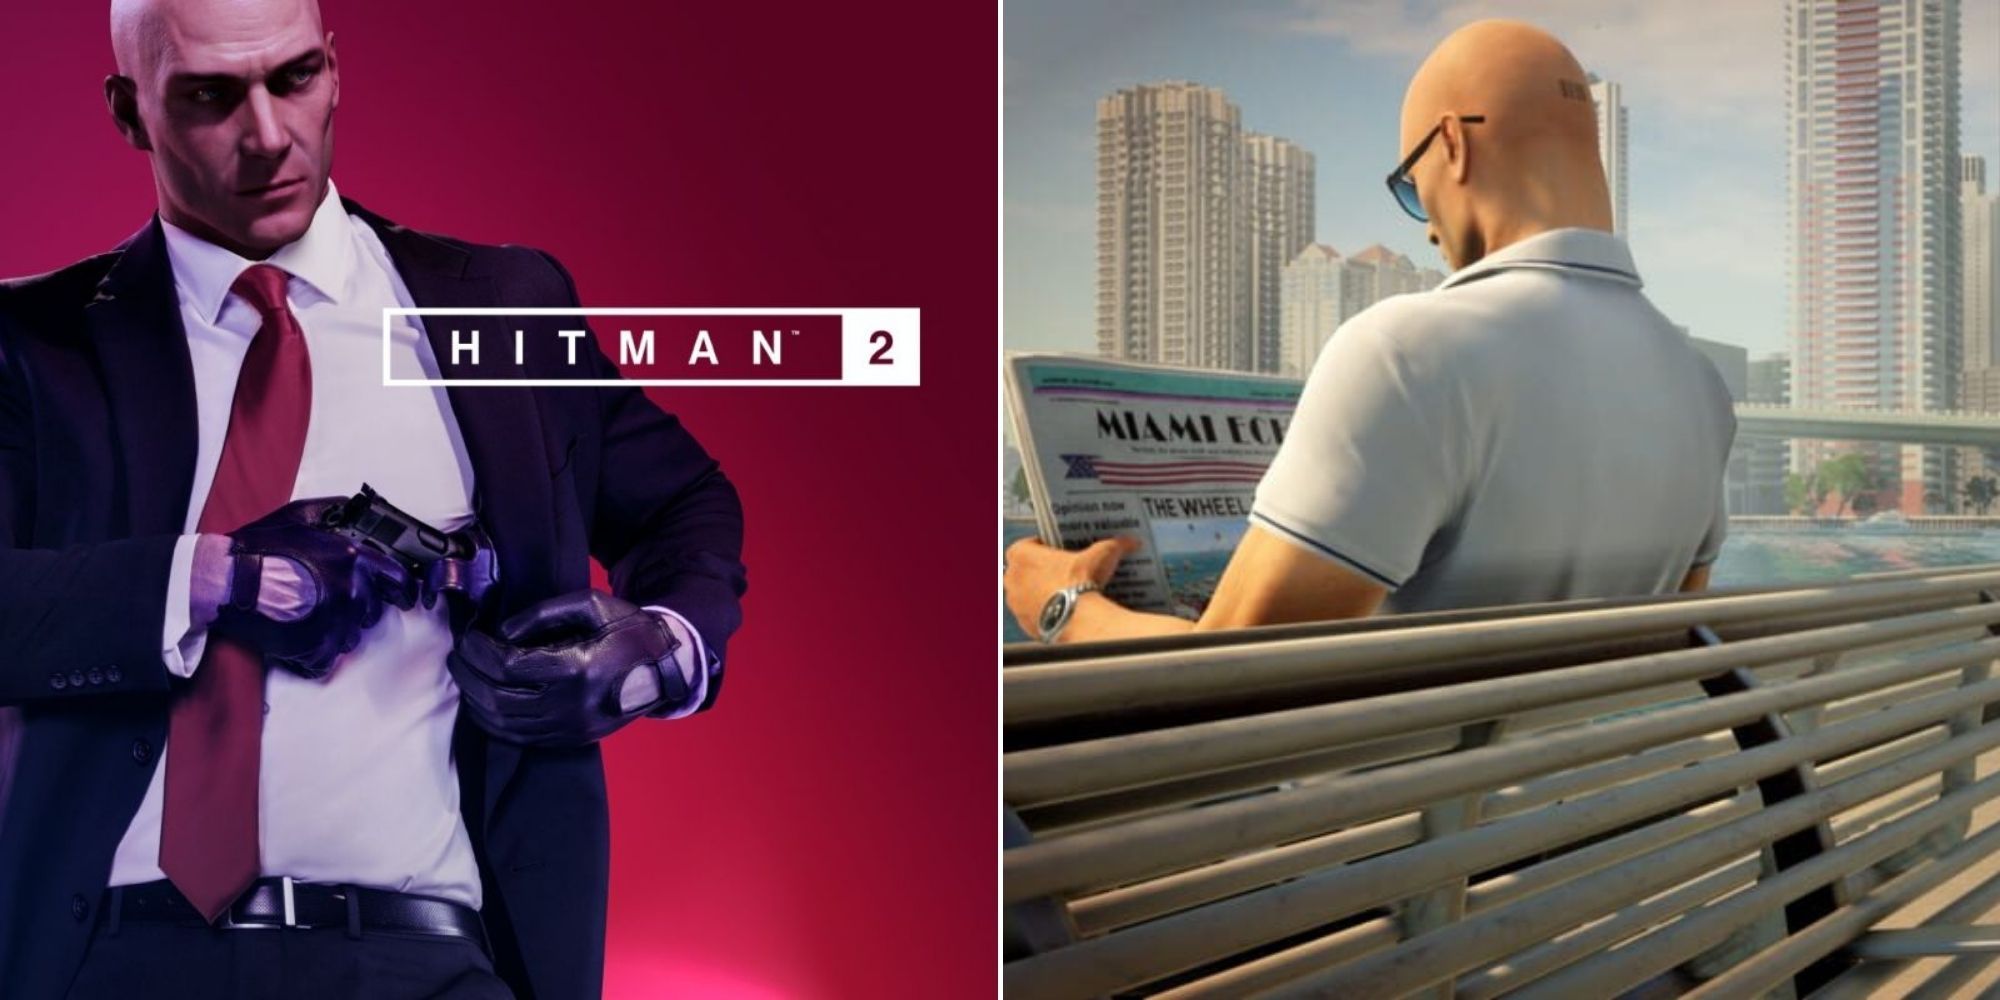 Hitman 2 - Cover Art - Agent 47 reading a newspaper to blend in